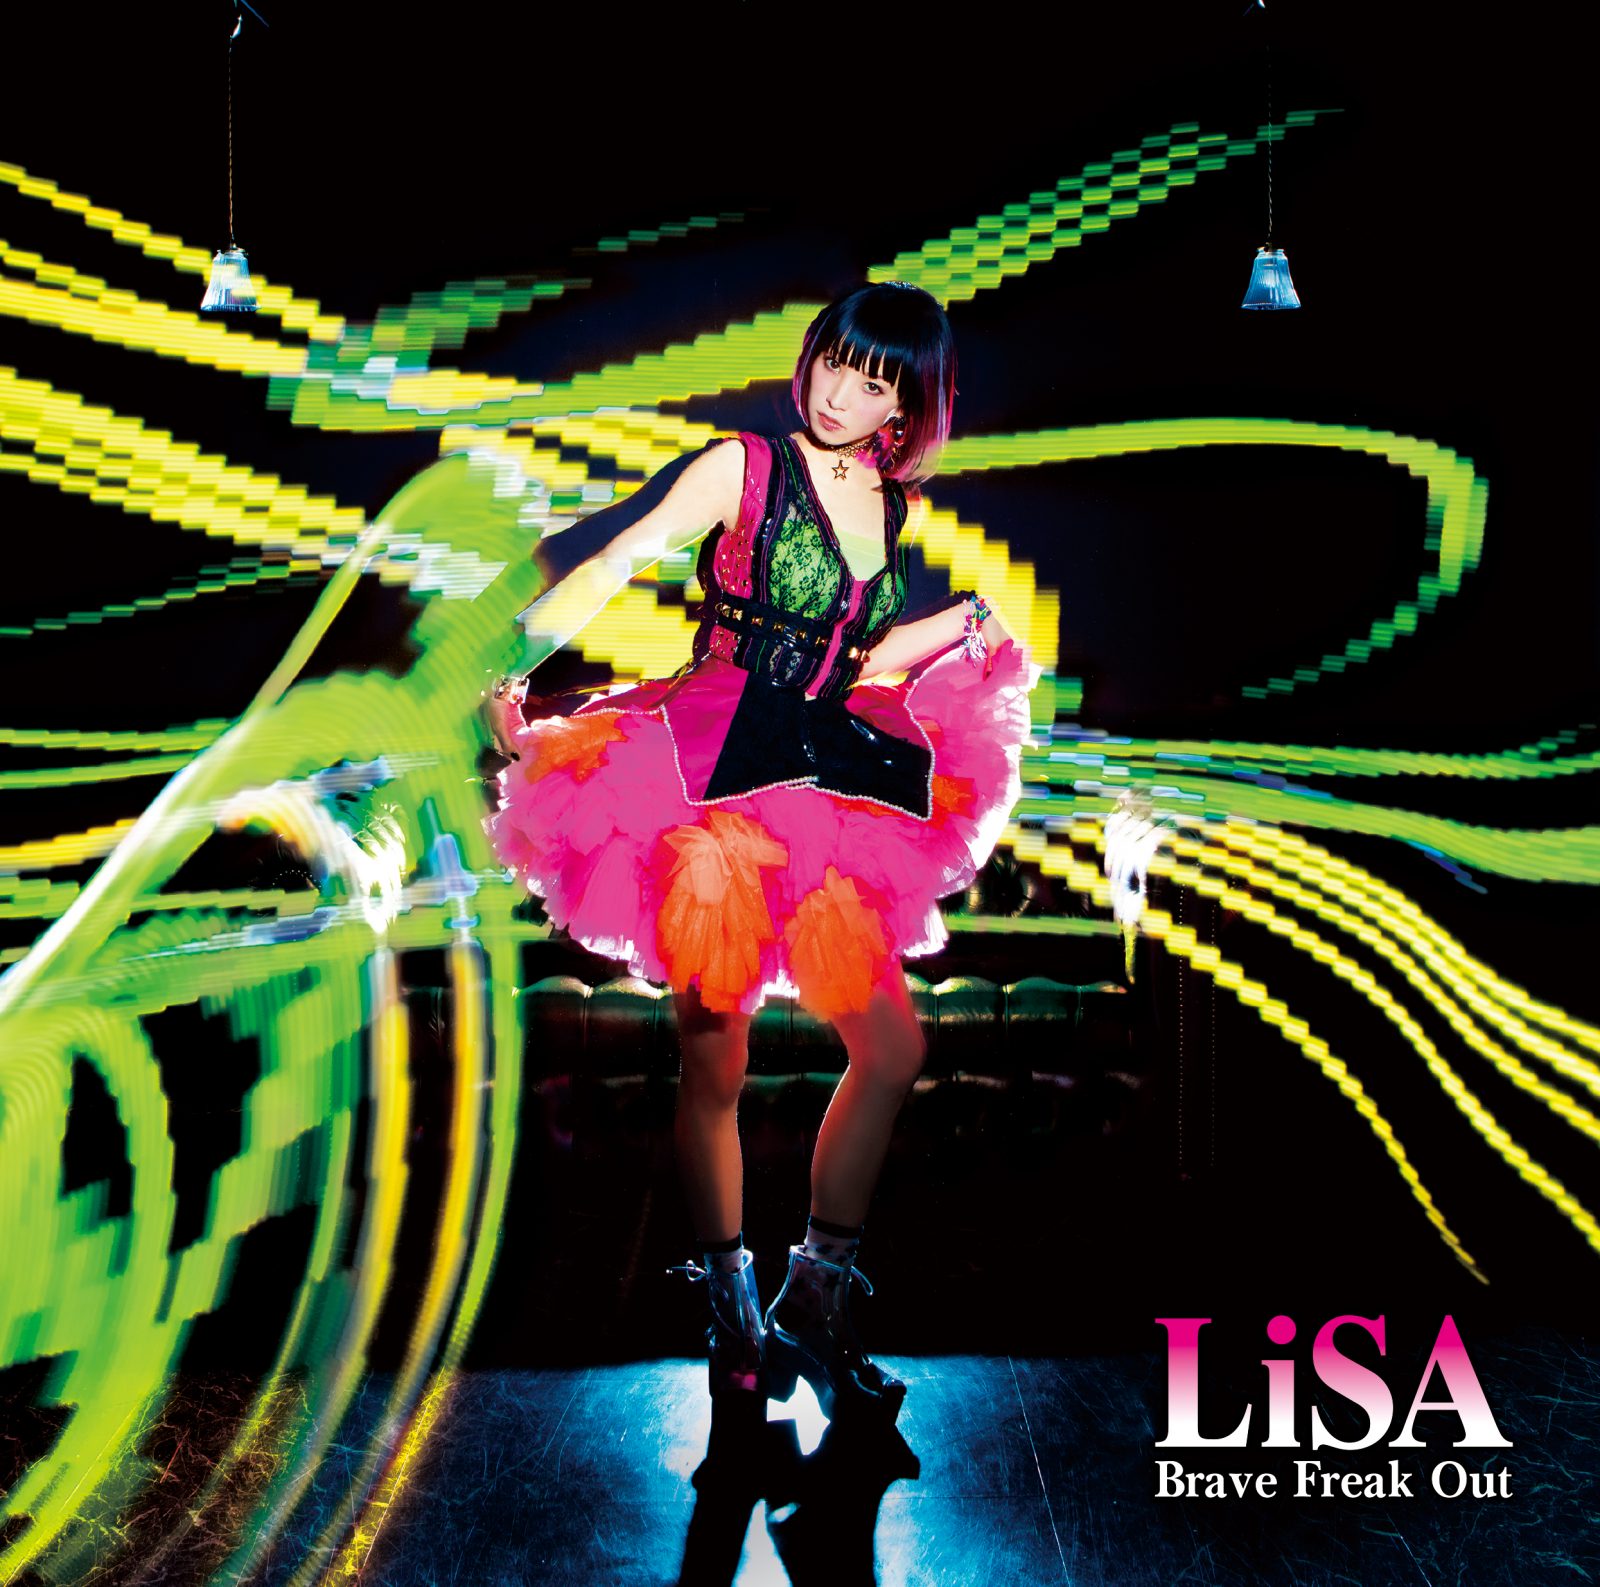 LiSA「Brave Freak Out(Special Edition)」レビュー - 画像一覧（1/2）